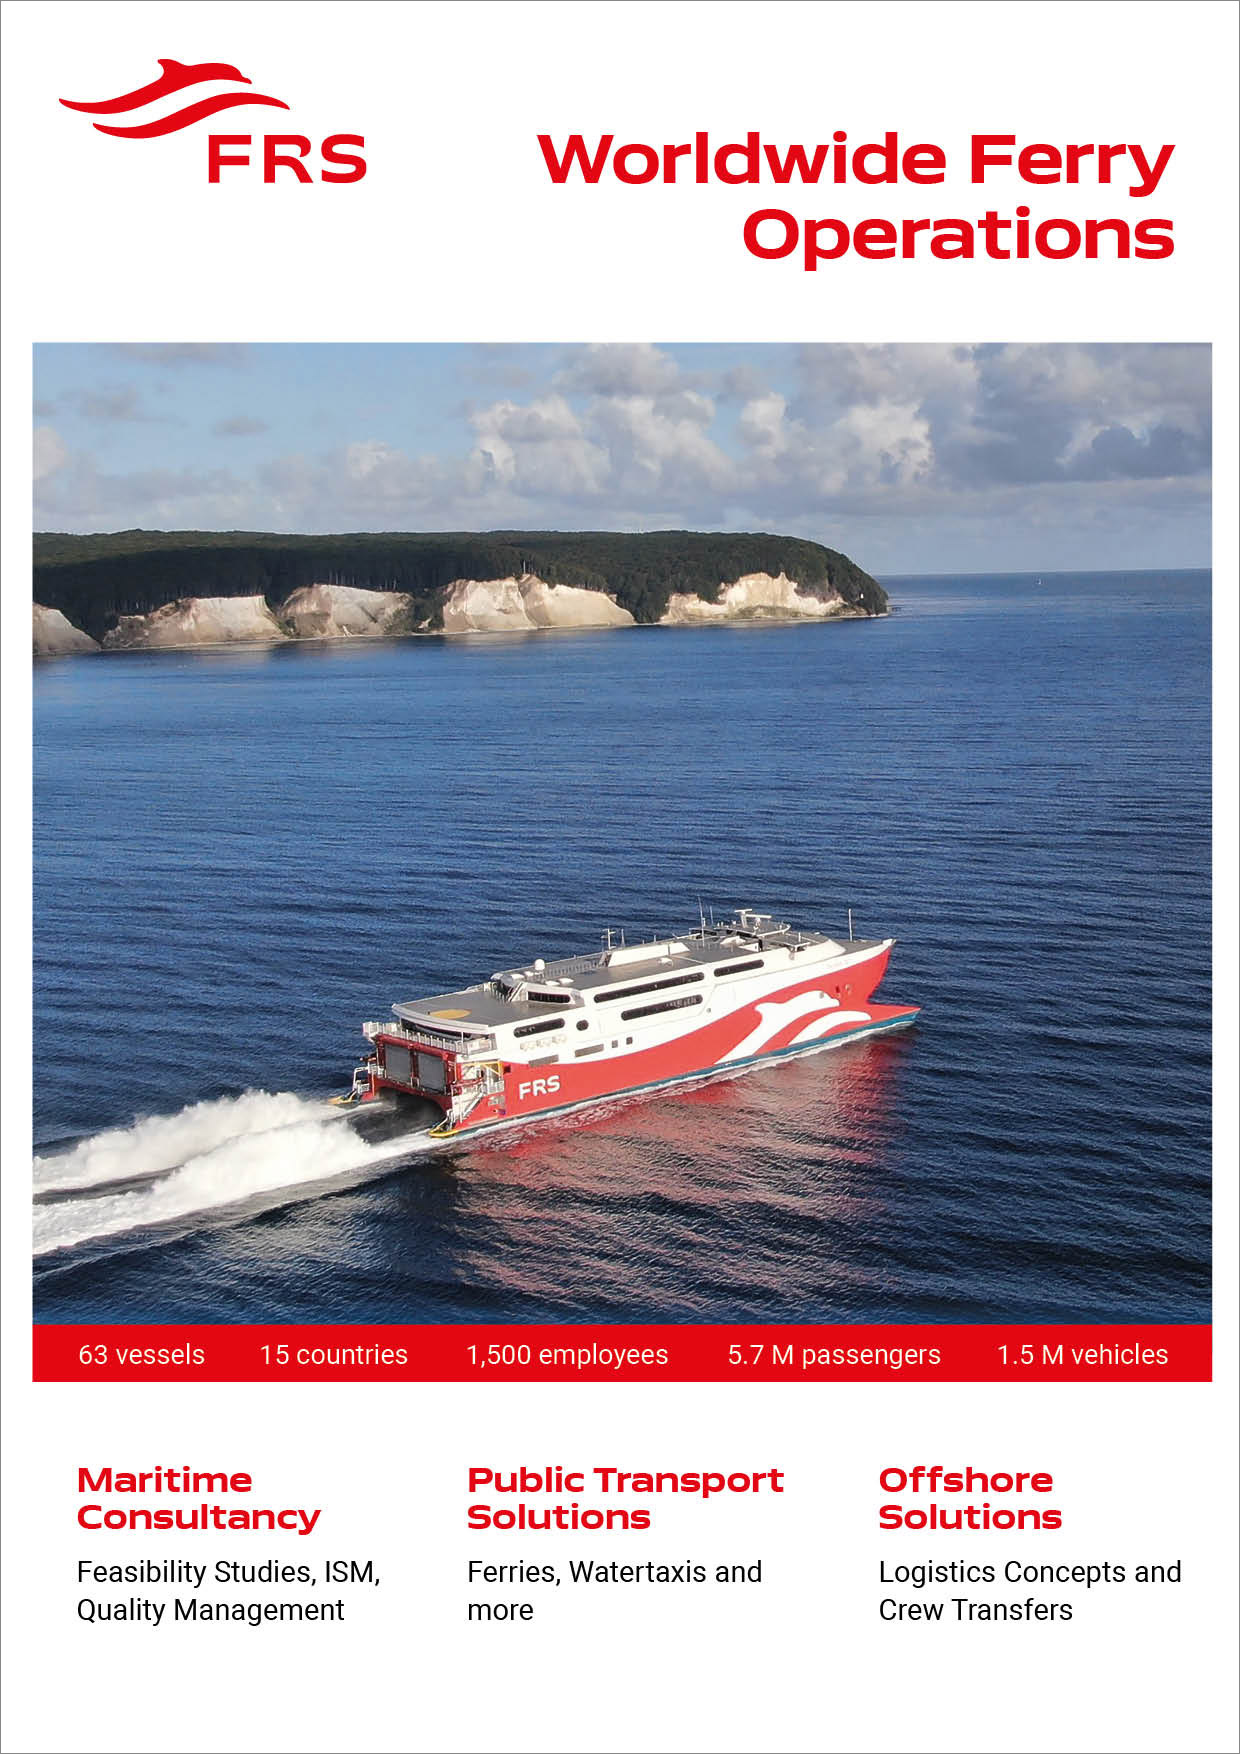 Image brochure of FRS – Worldwide Ferry Operations.